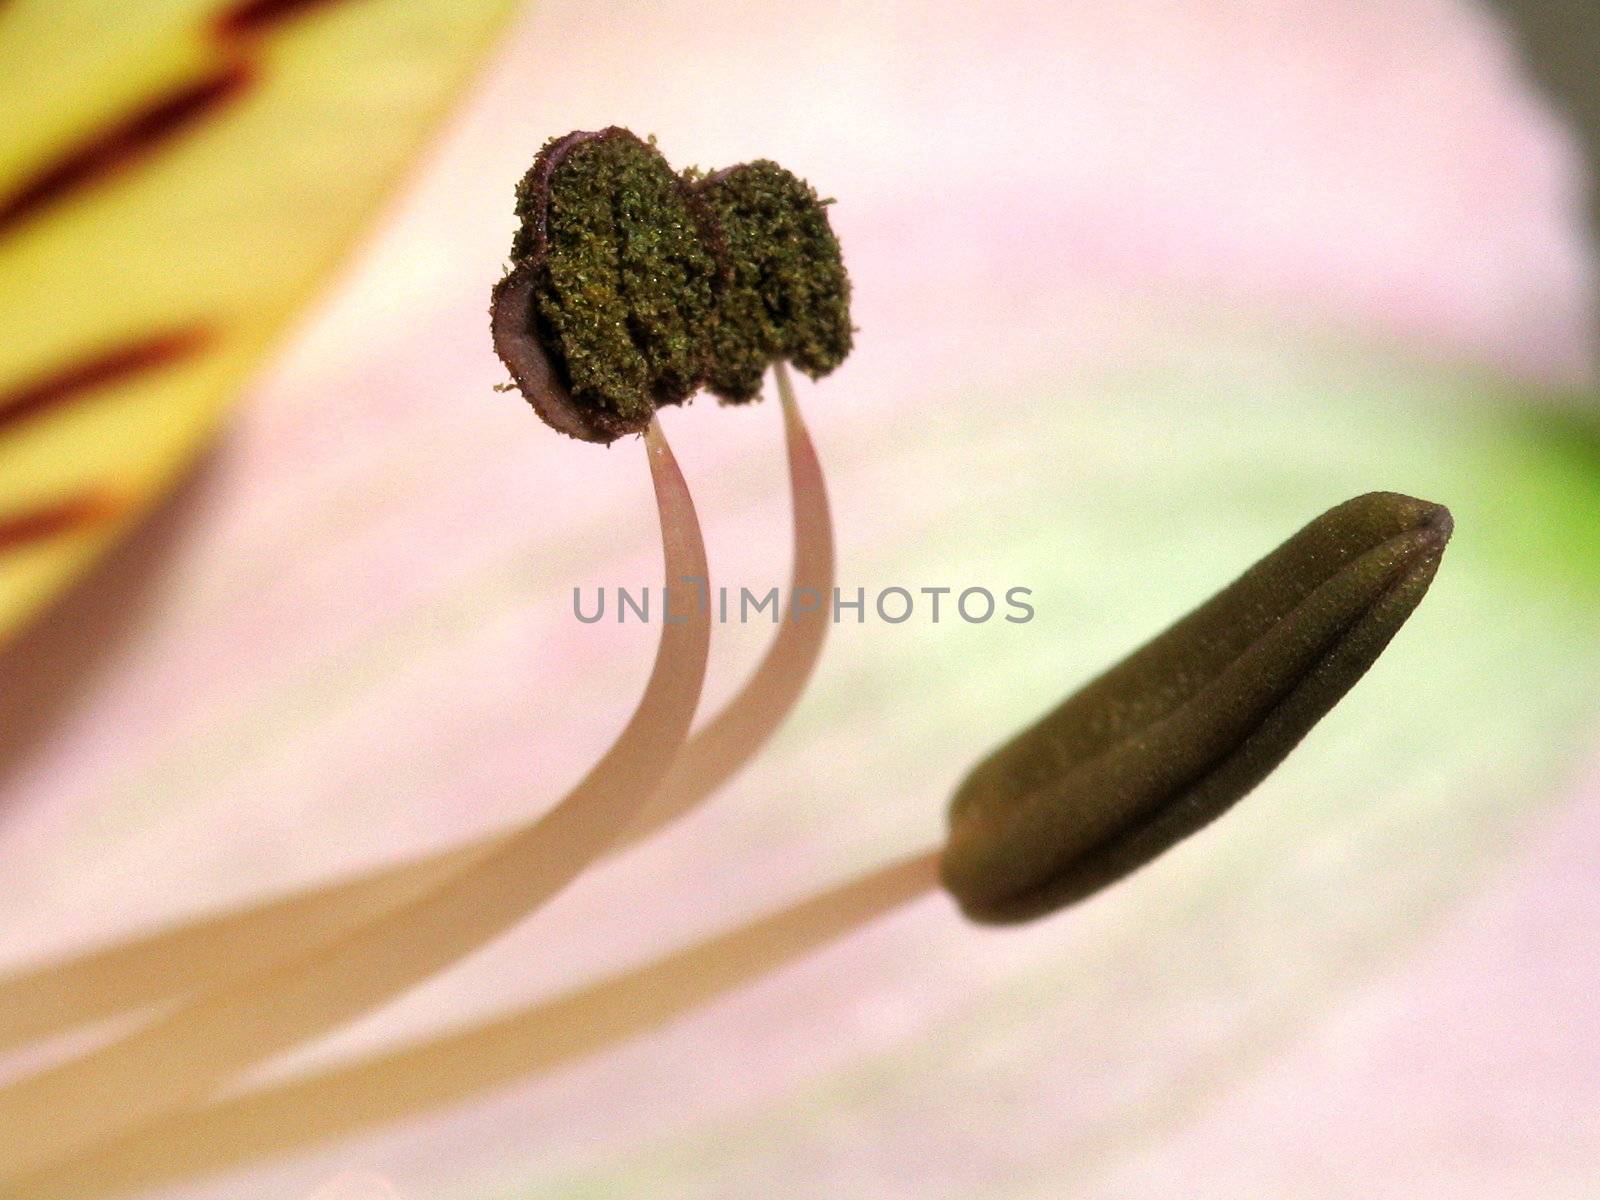 Pestles and stamens by ichip